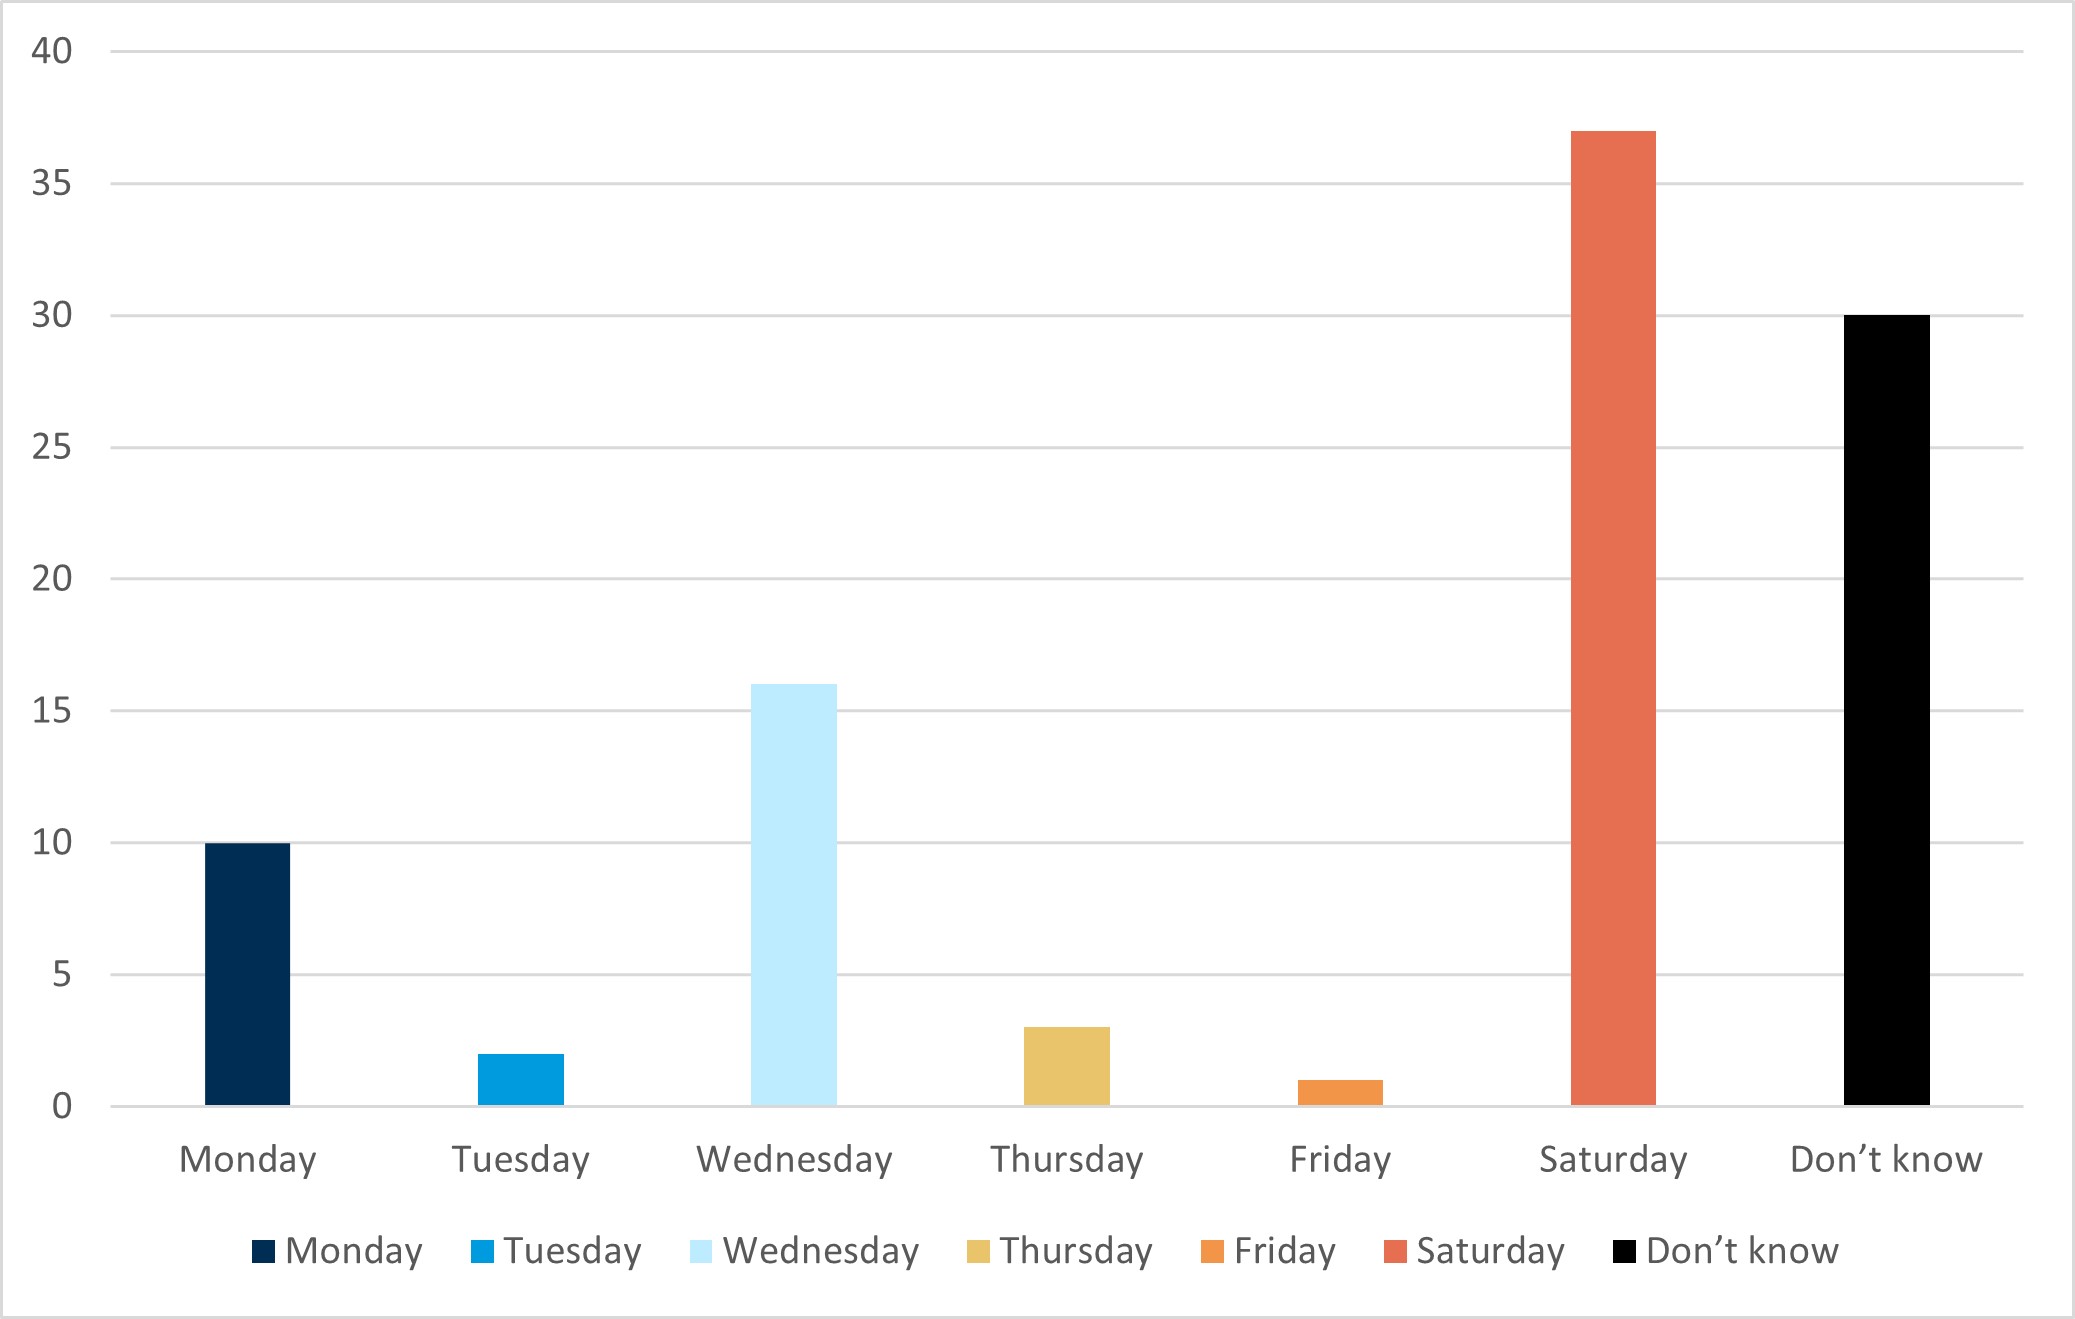 A graph on consumer preferences on day of no letter delivery. The graph shows that over a third of participants would choose Saturday, around a third said they don't know, around 15% said Wednesday and 10% said Monday.